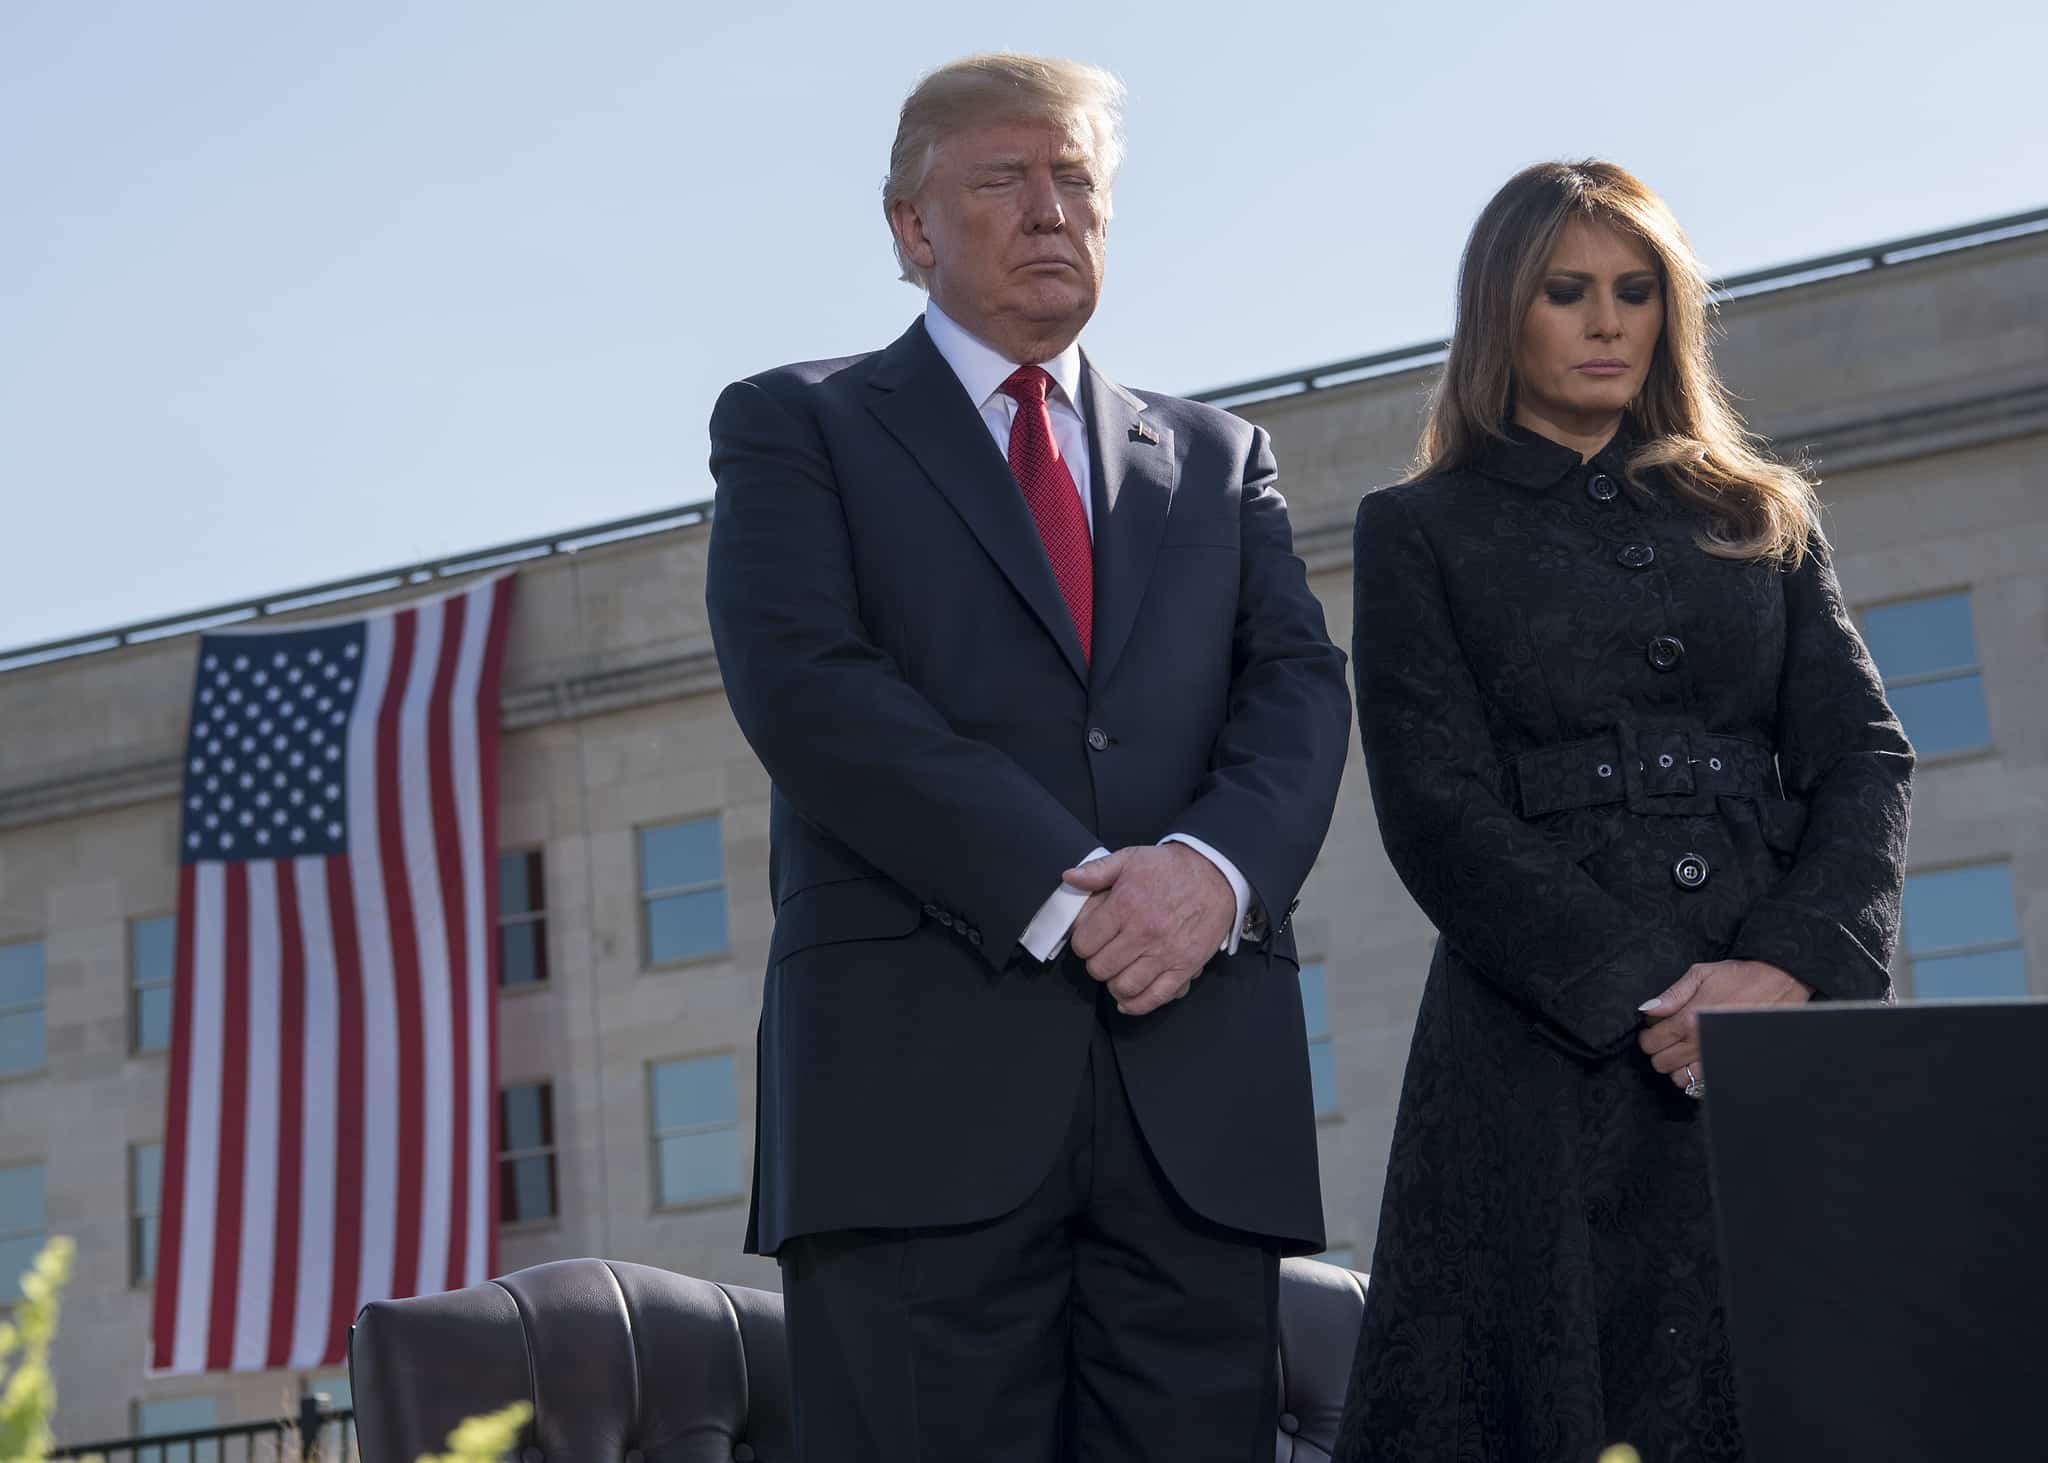 Trump and first lady honor those who died during 9/11 at the «Tower of voices» in Pennsylvania